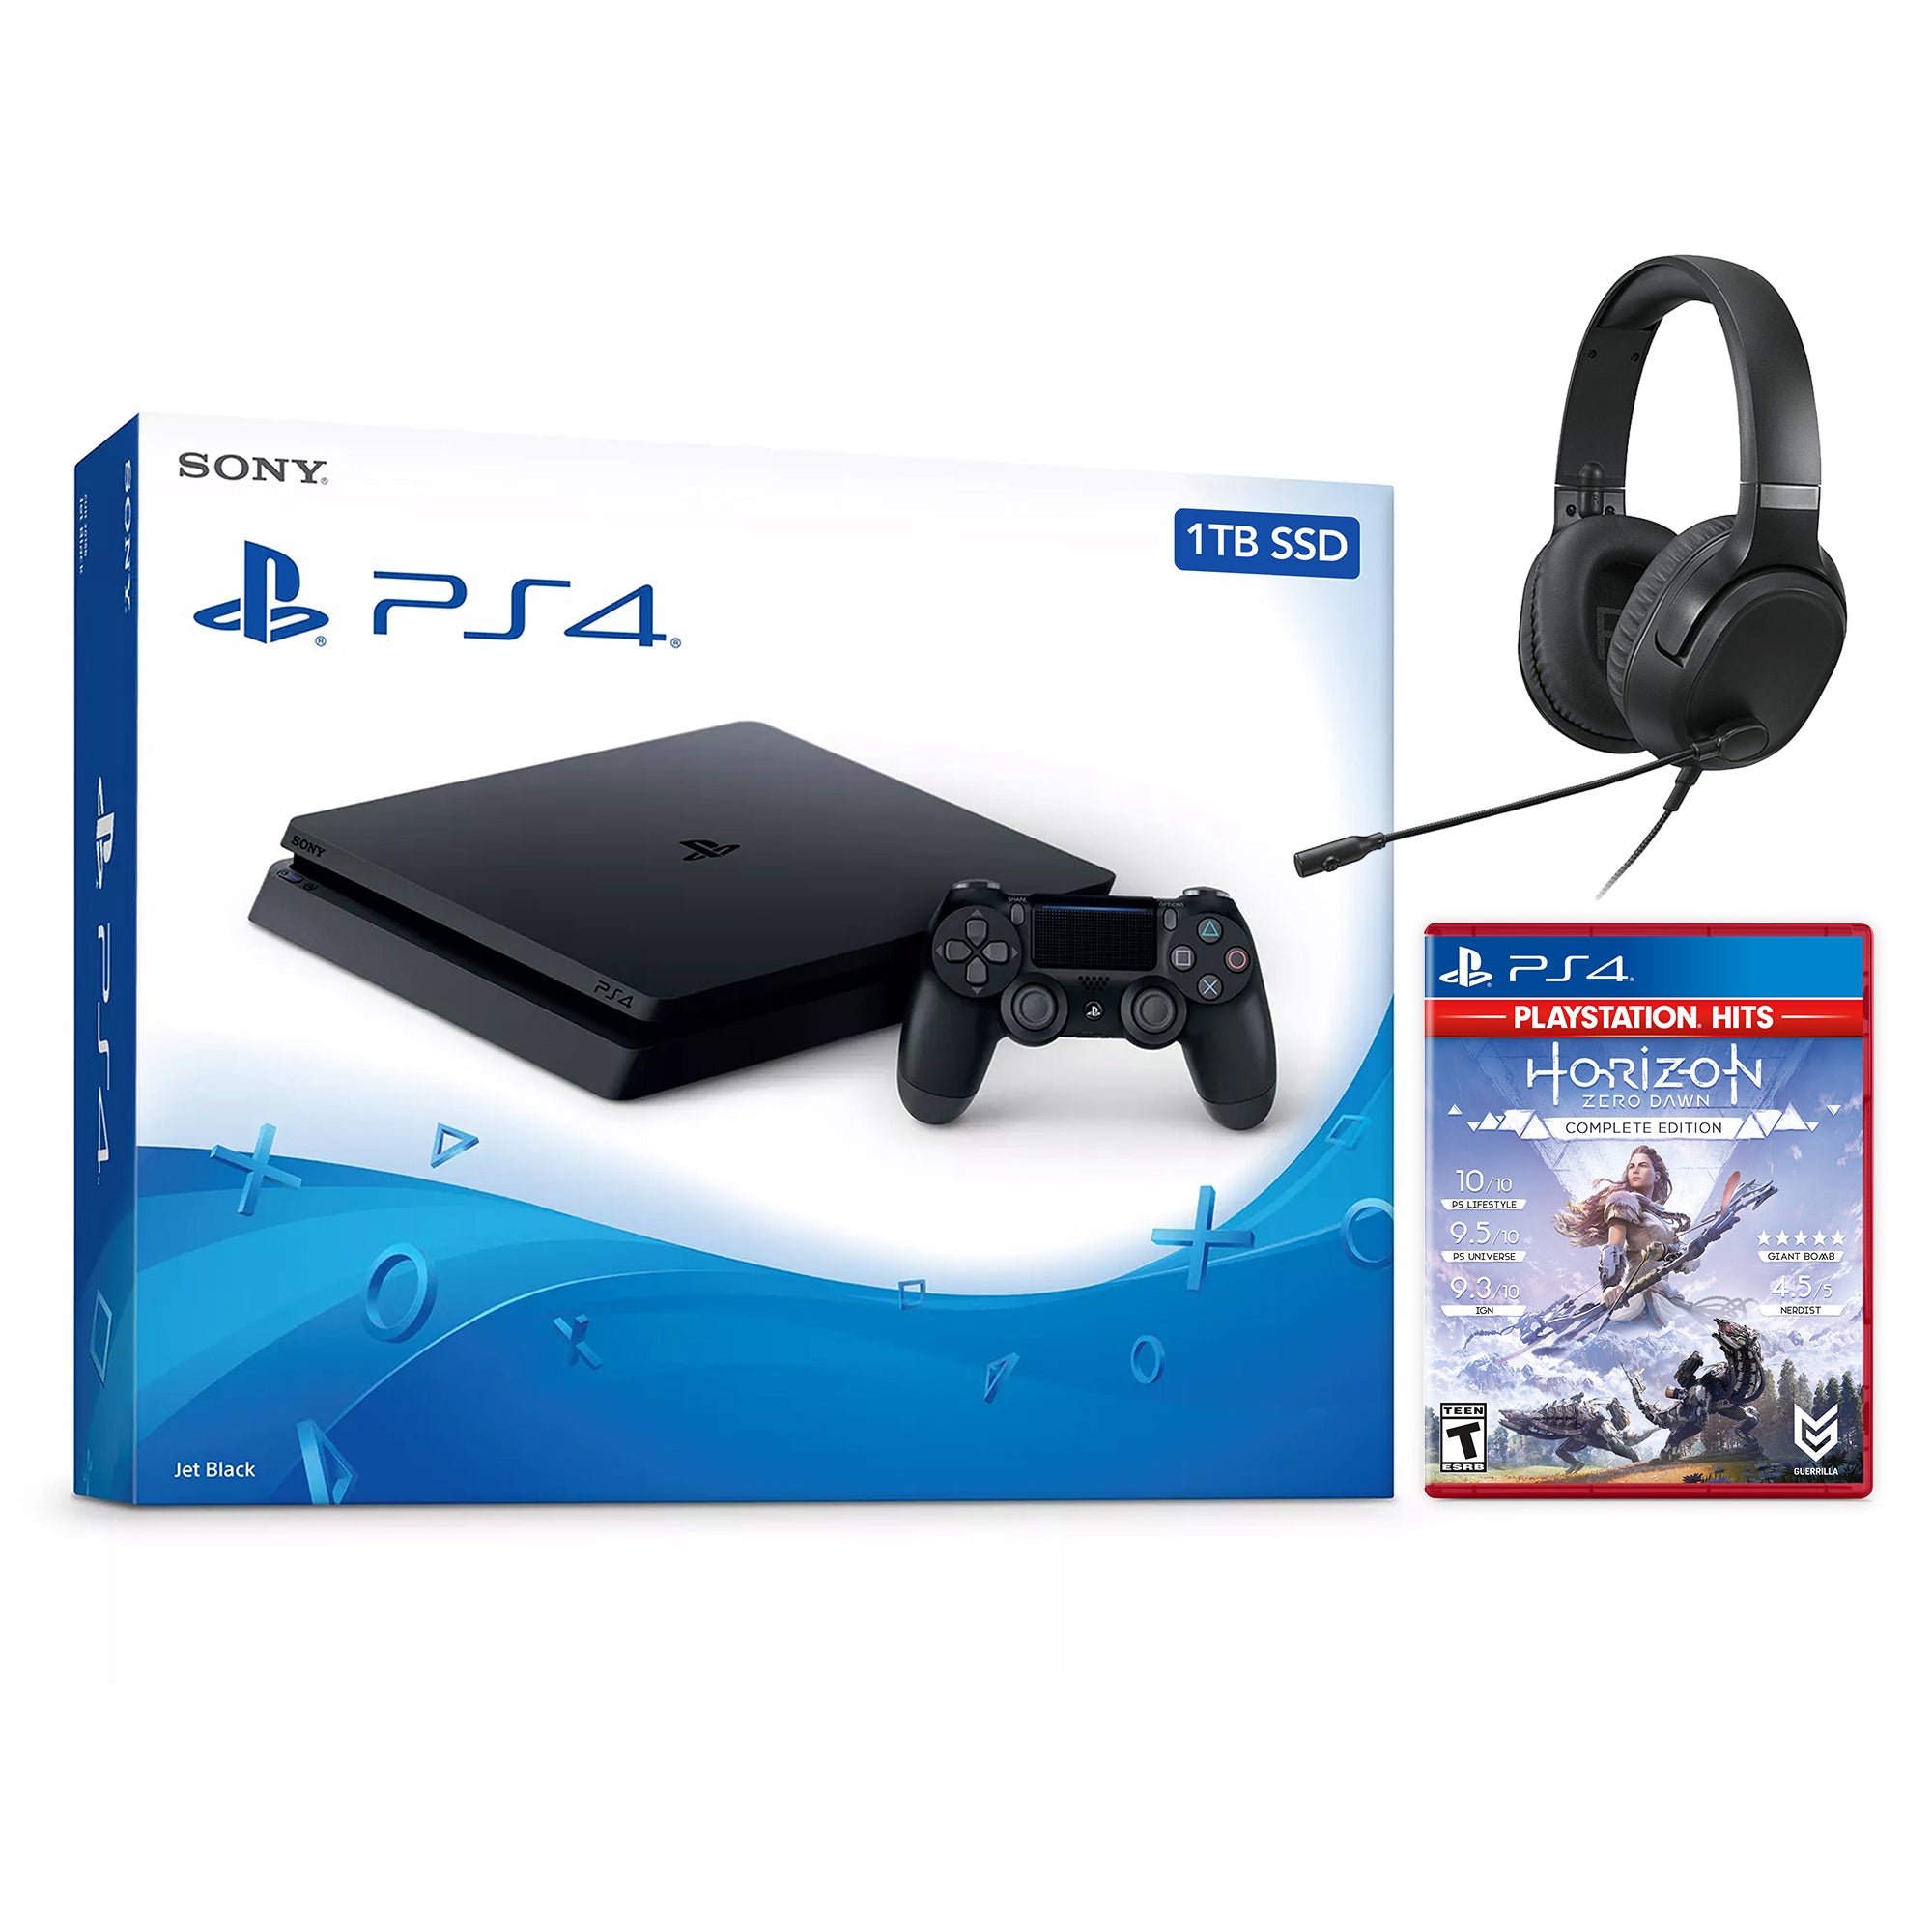 Sony PlayStation 4 Slim Call of Duty Vanguard Bundle Upgrade 1TB SSD PS4 Gaming Console, Jet Black, with Mytrix Chat Headset - Internal Fast Solid State Drive Enhanced PS4 Console